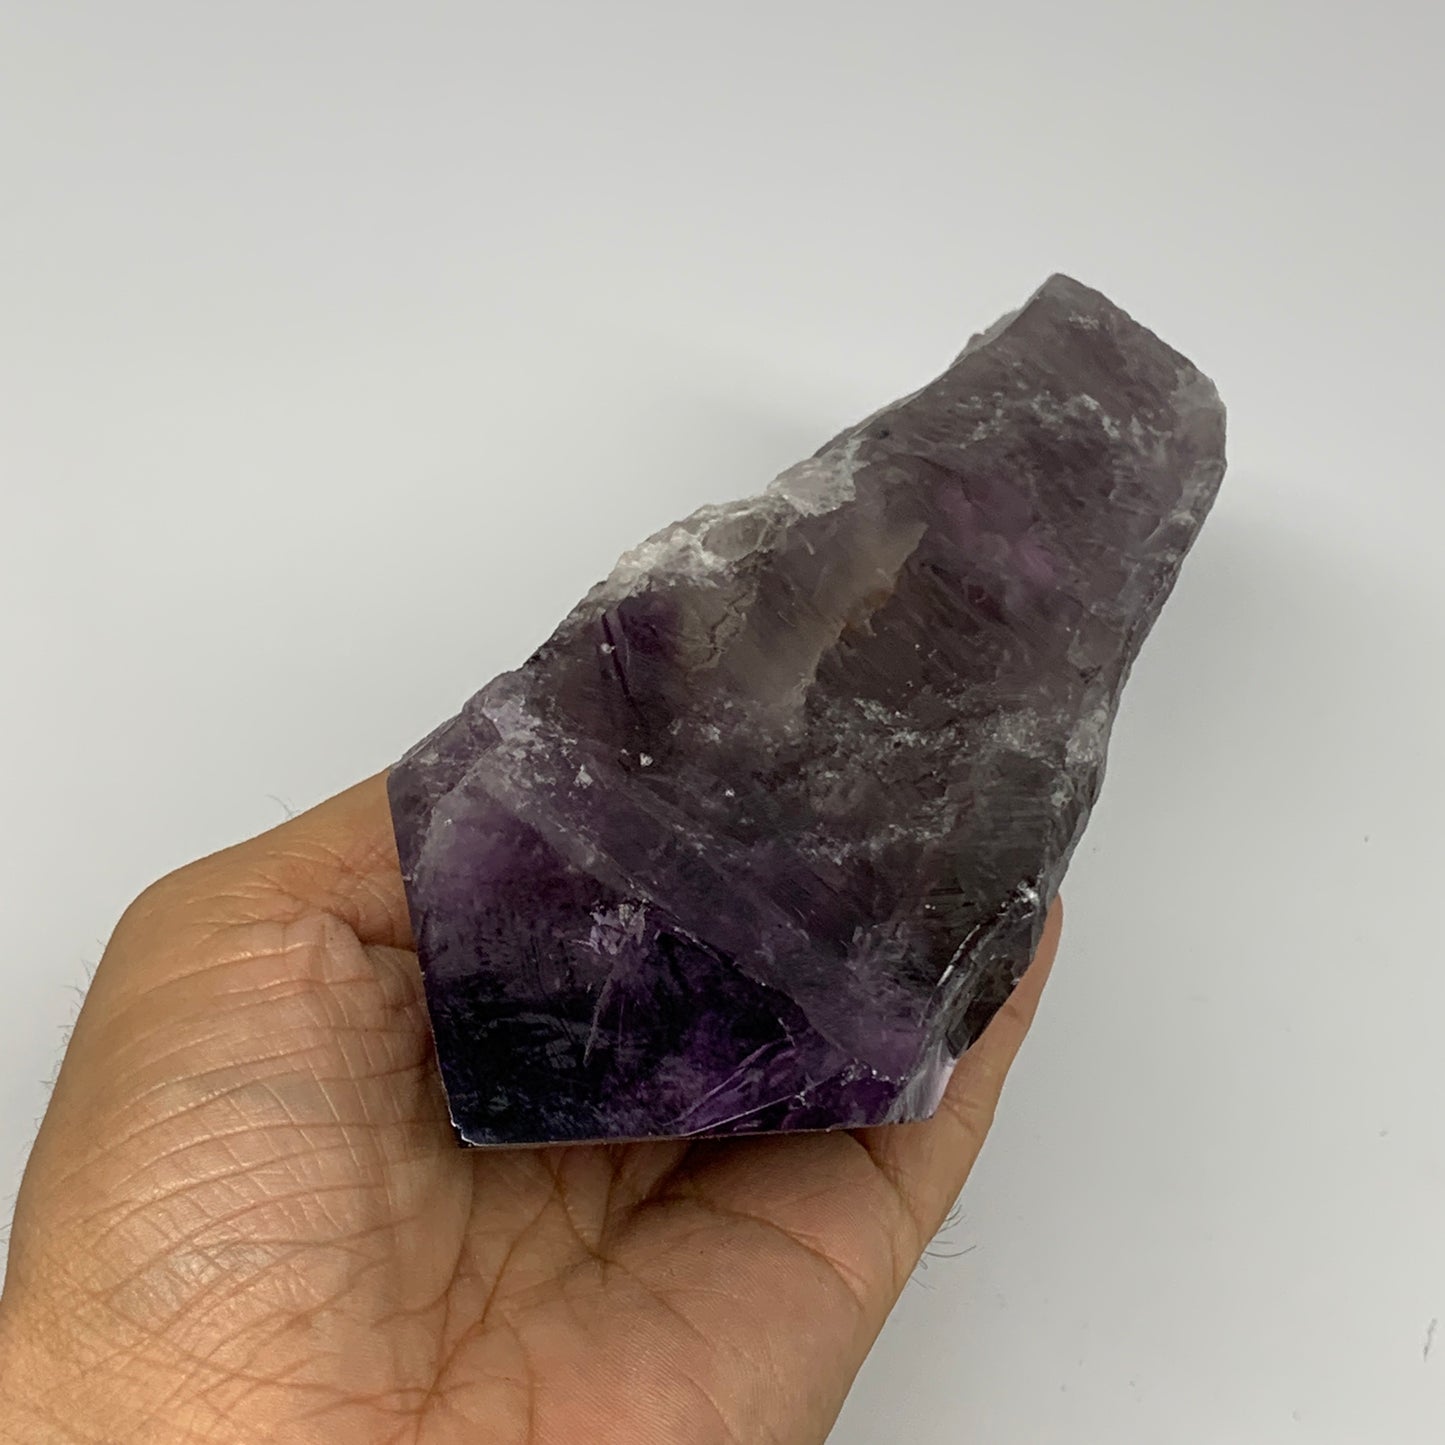 610g,8"x2.4"x1.8",Amethyst Point Polished Rough lower part from Brazil,B19119